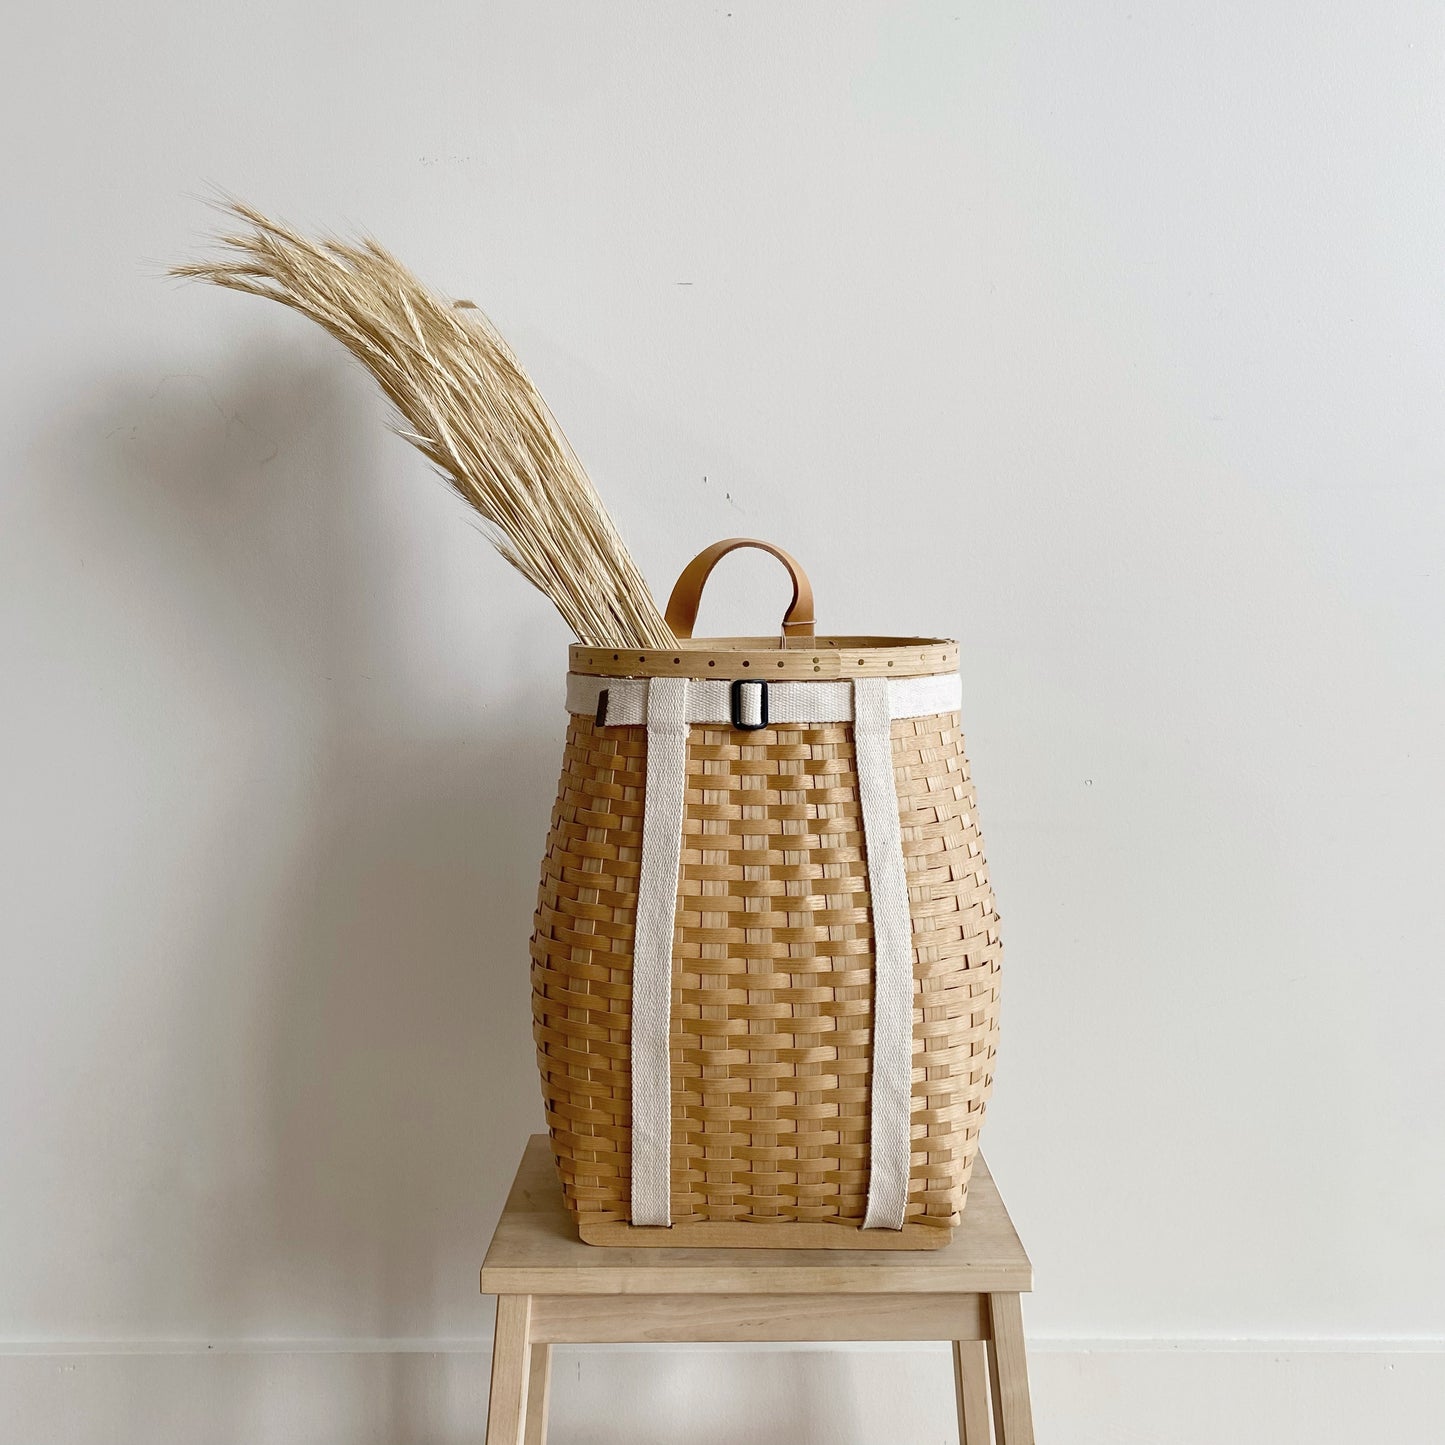 Found Woven Foraging Backpack